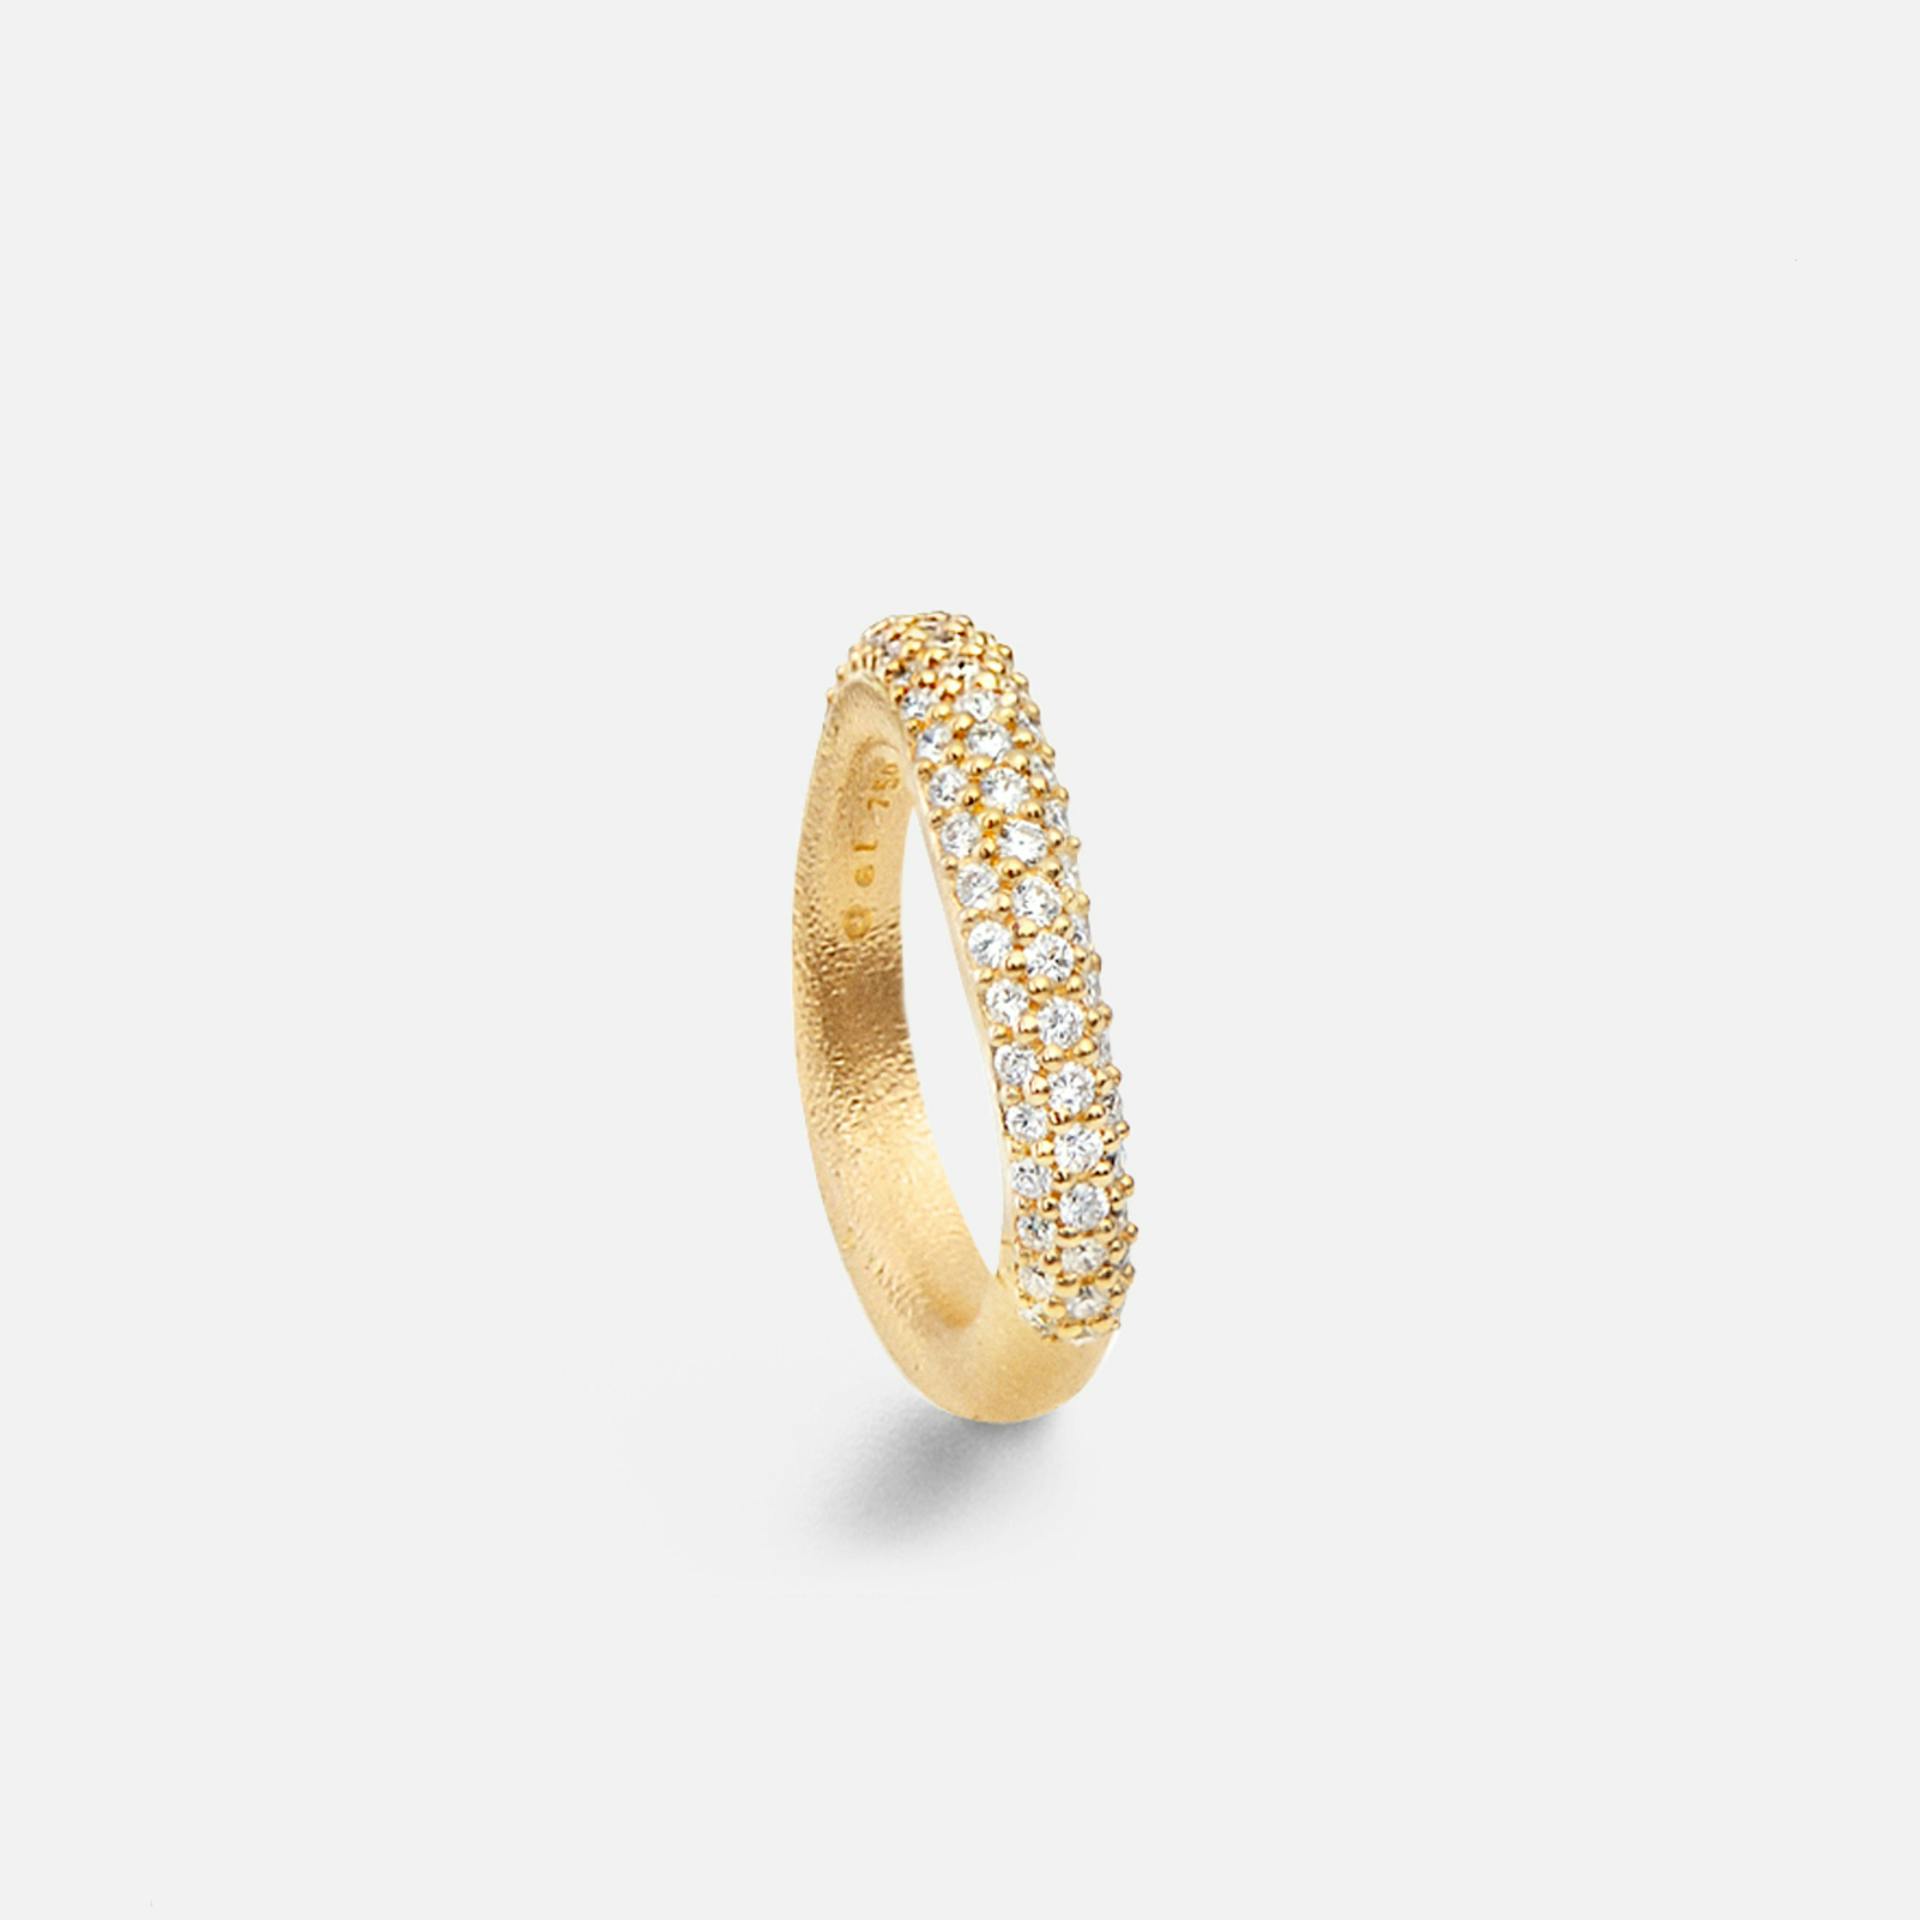 Love ring 4 18k gold textured and diamonds 0.71 ct. TW. VS.